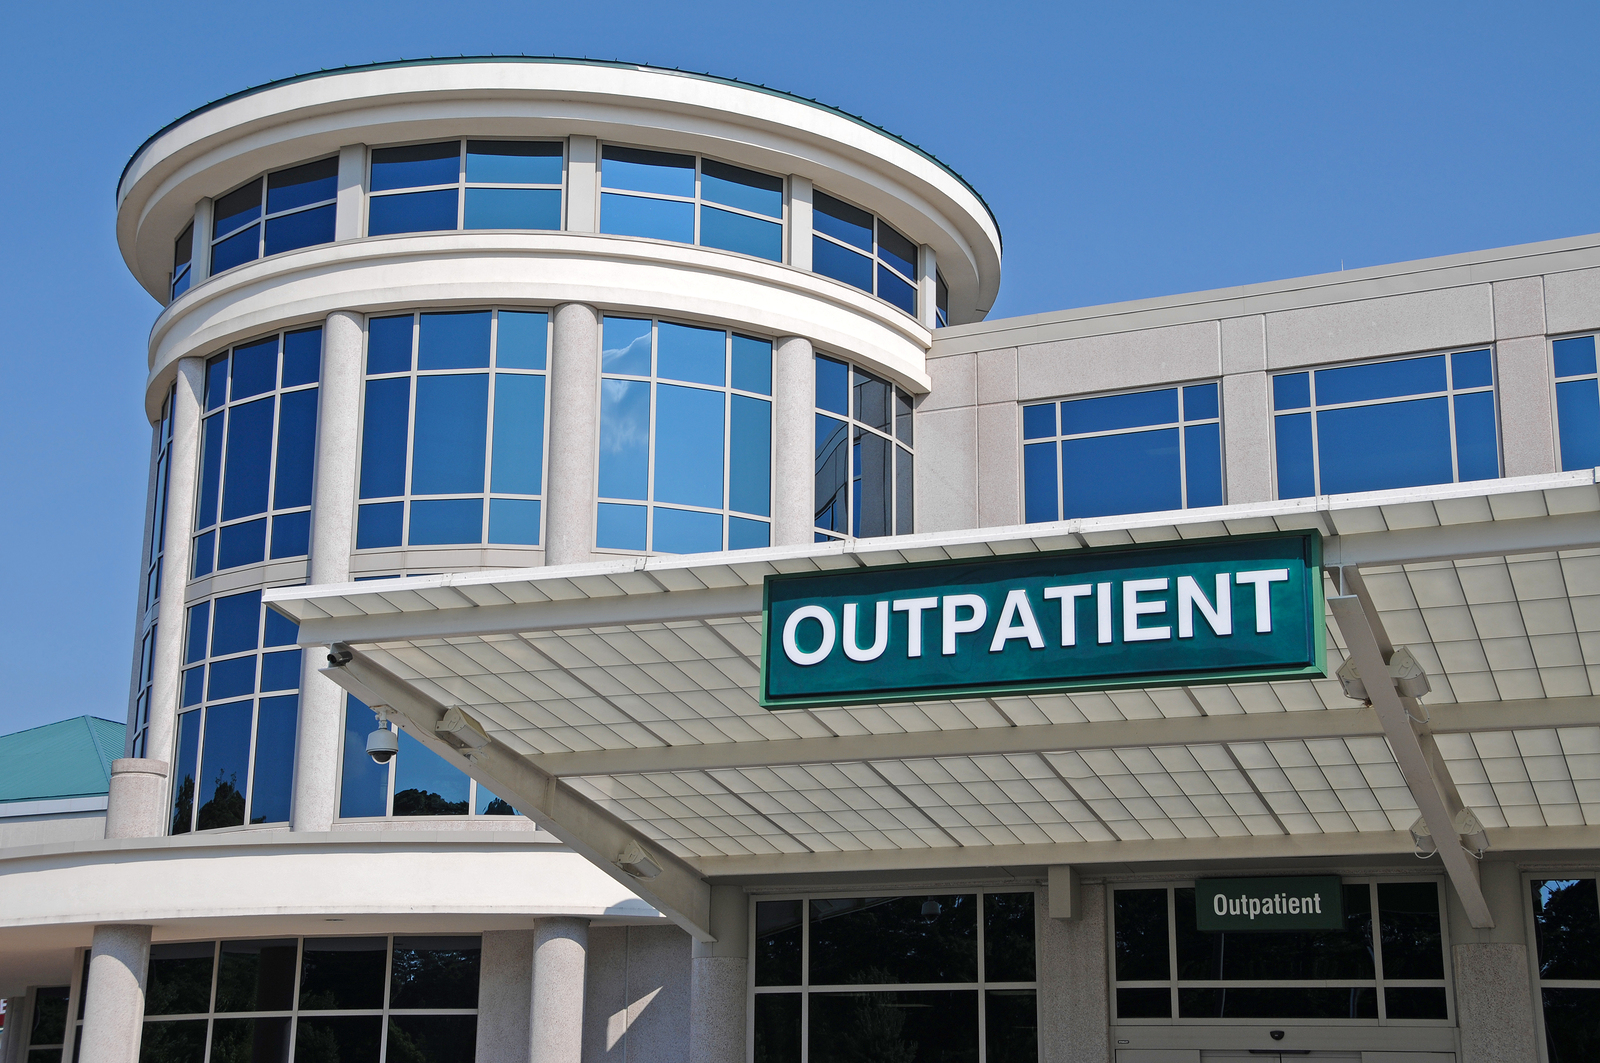 Consider a Travel Therapist or Imaging Tech Assignment In an Outpatient Setting